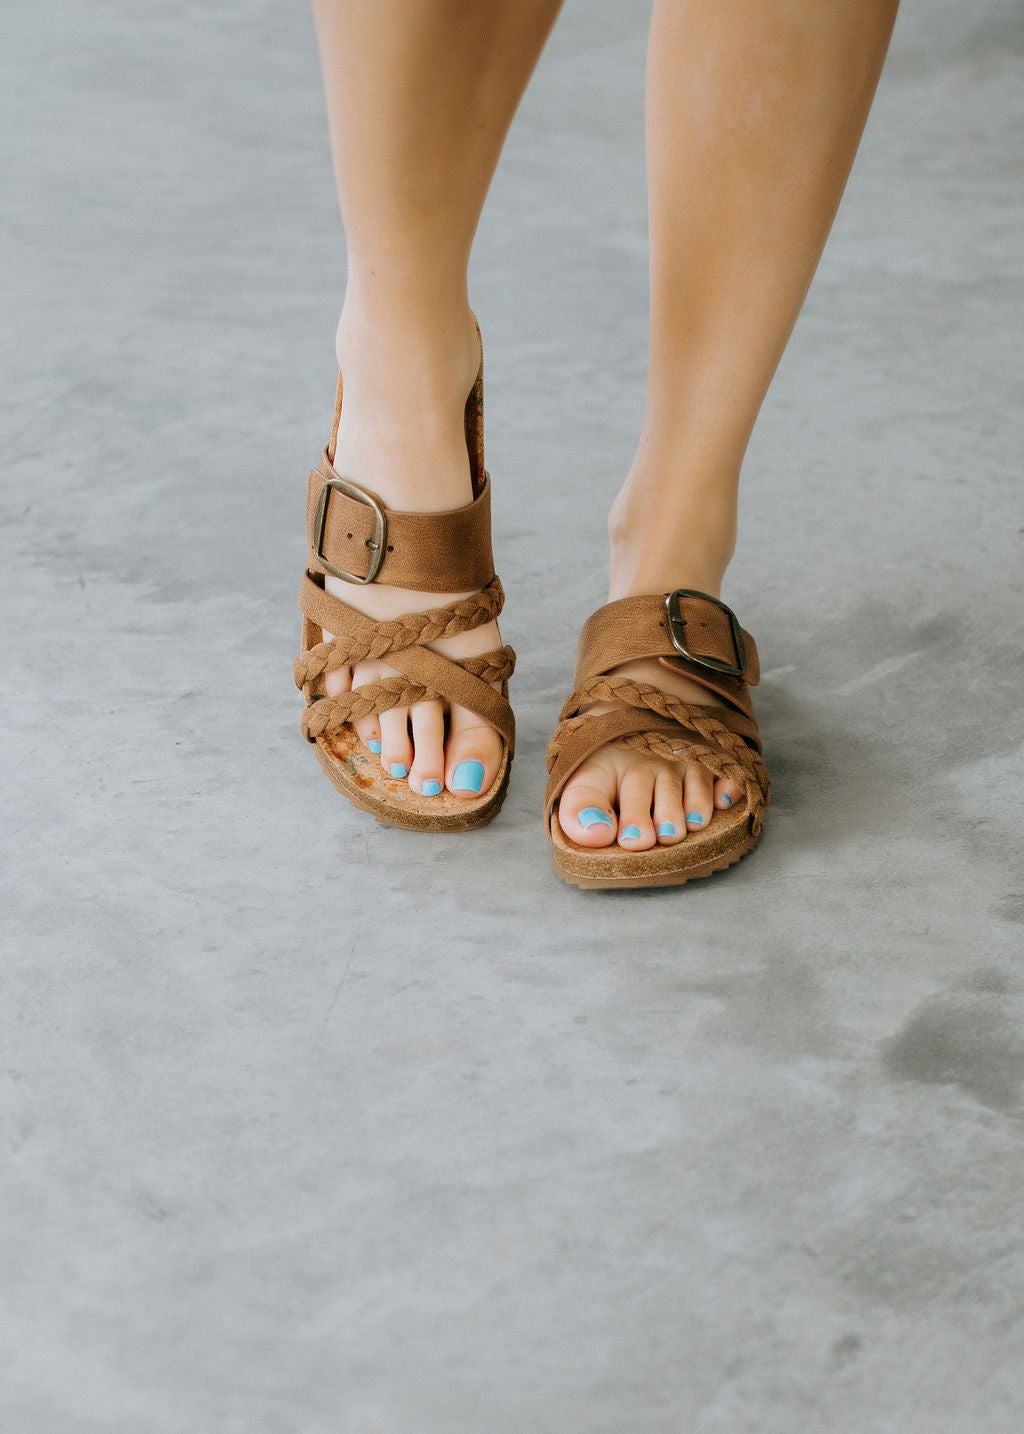 image of Norah Sandals by Very G